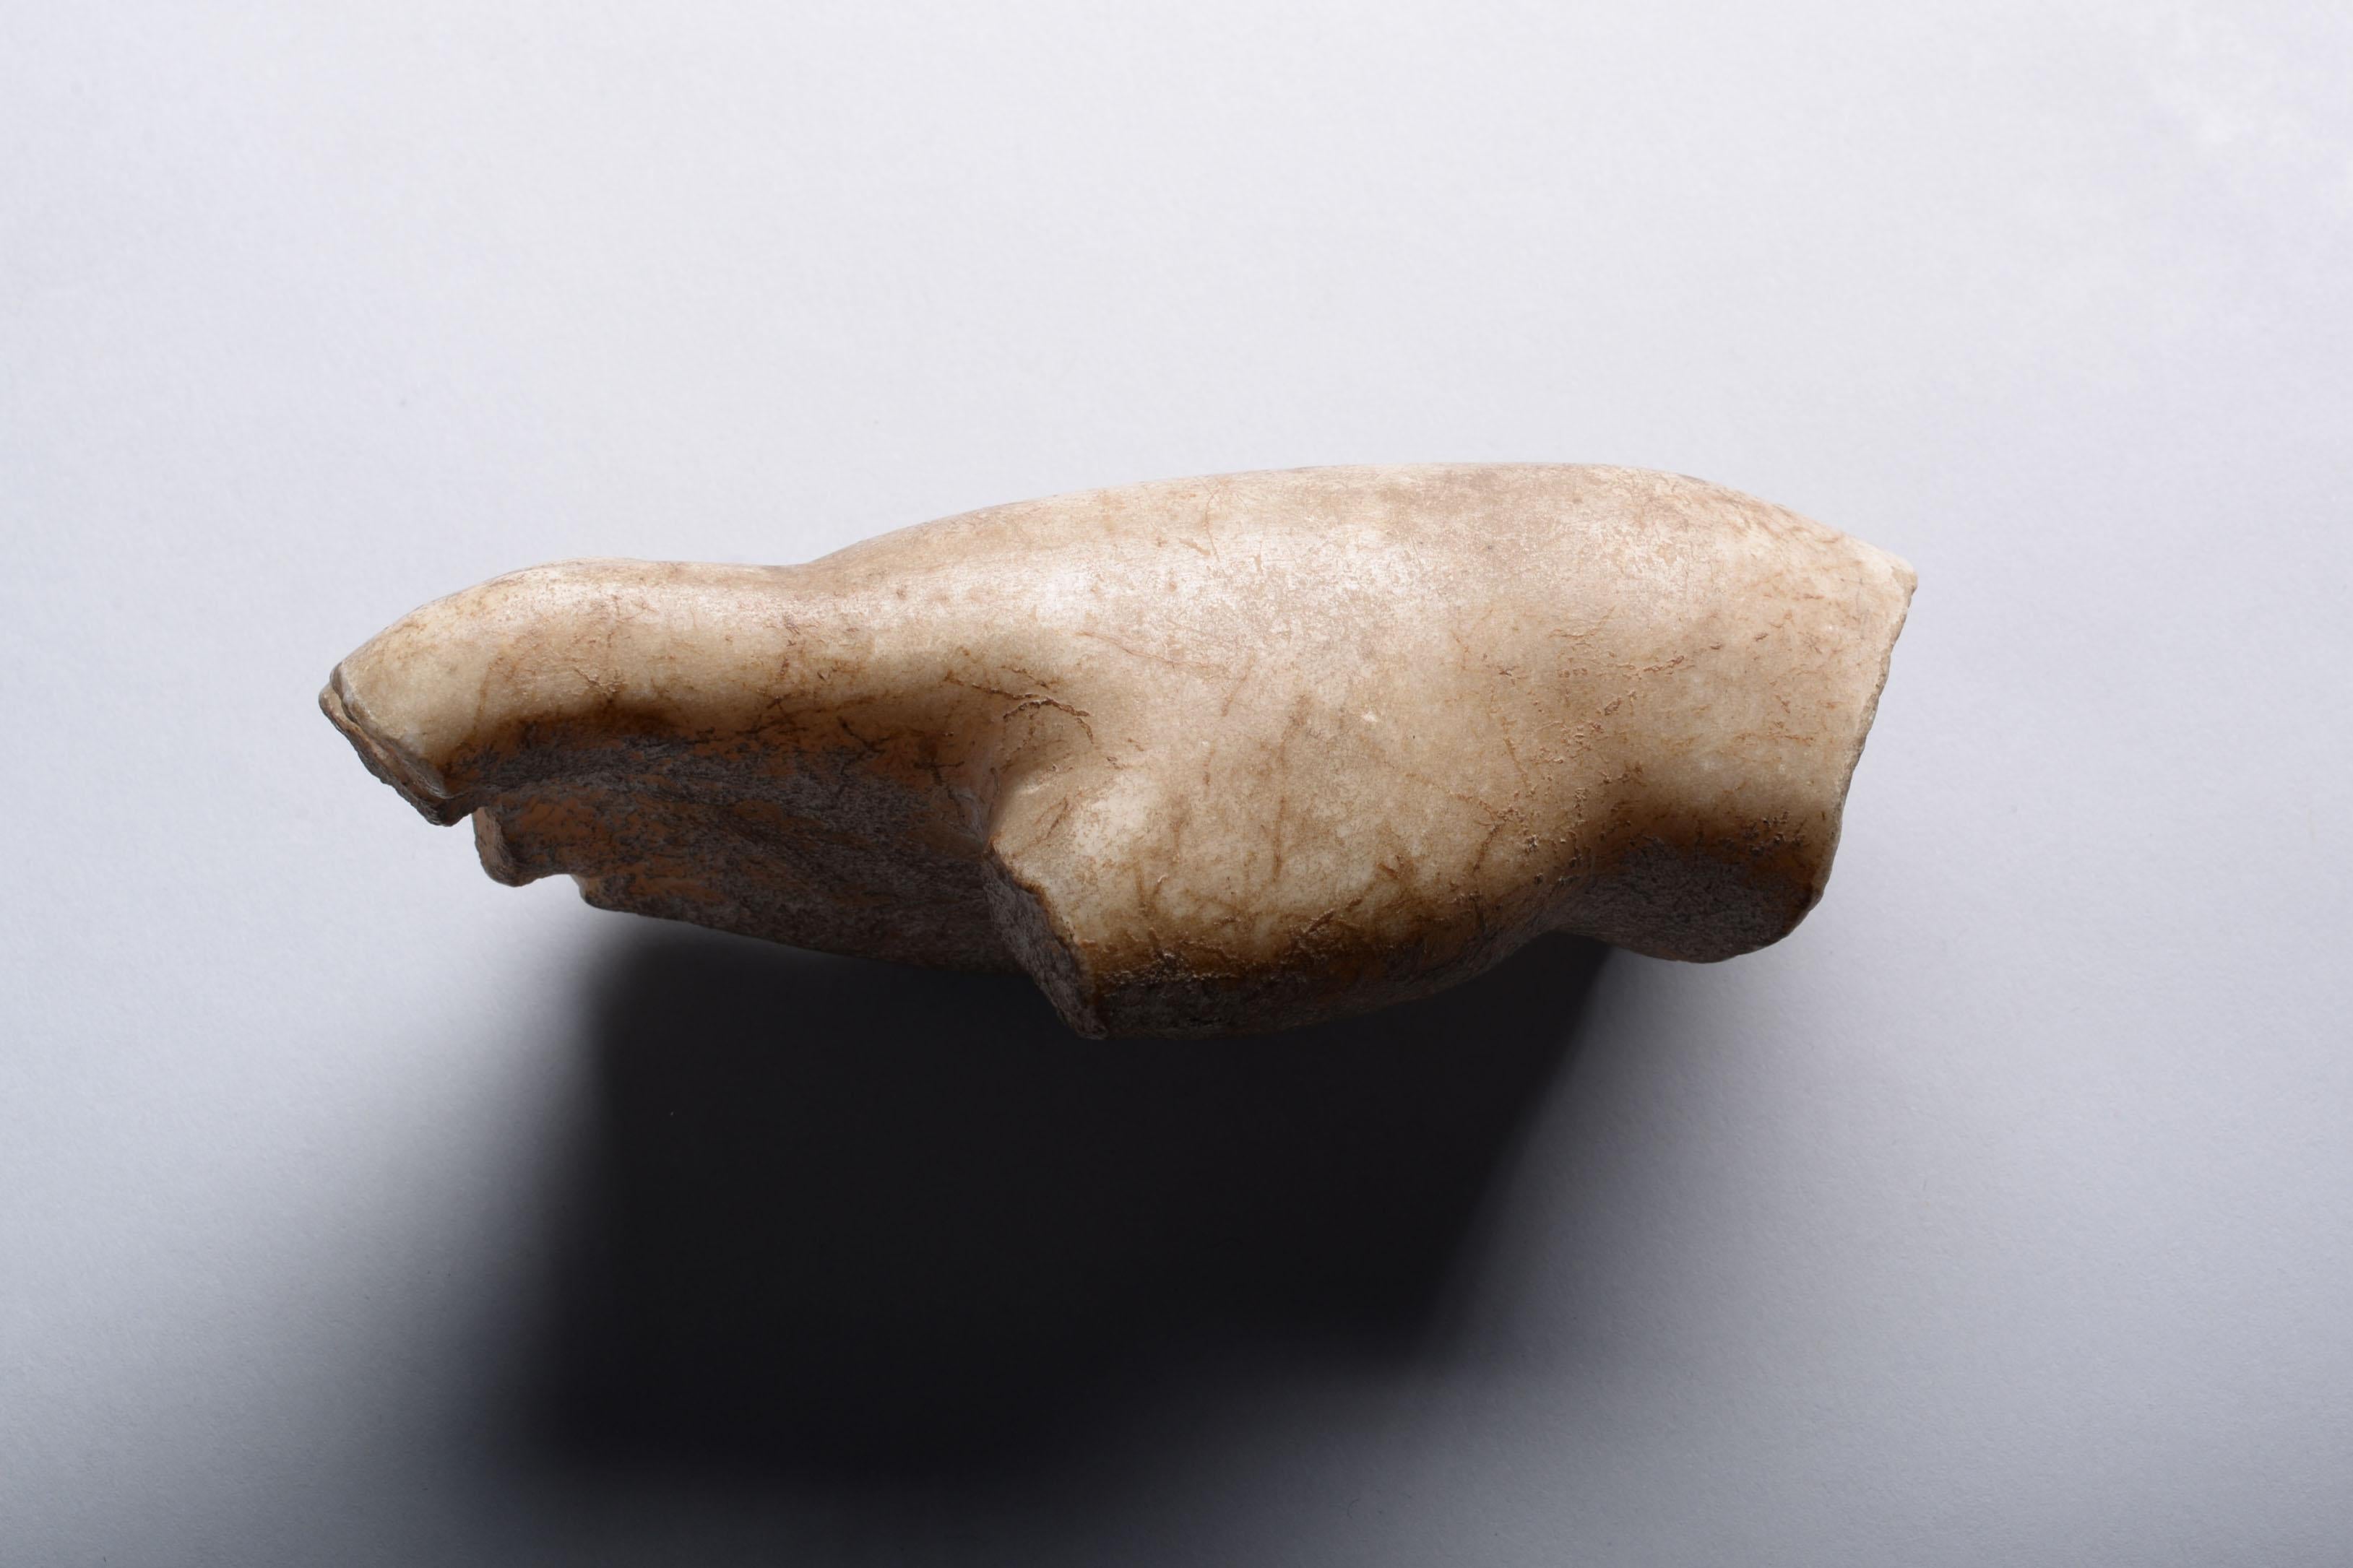 Roman Marble Fragment of a Hand - Gray Figurative Sculpture by Unknown